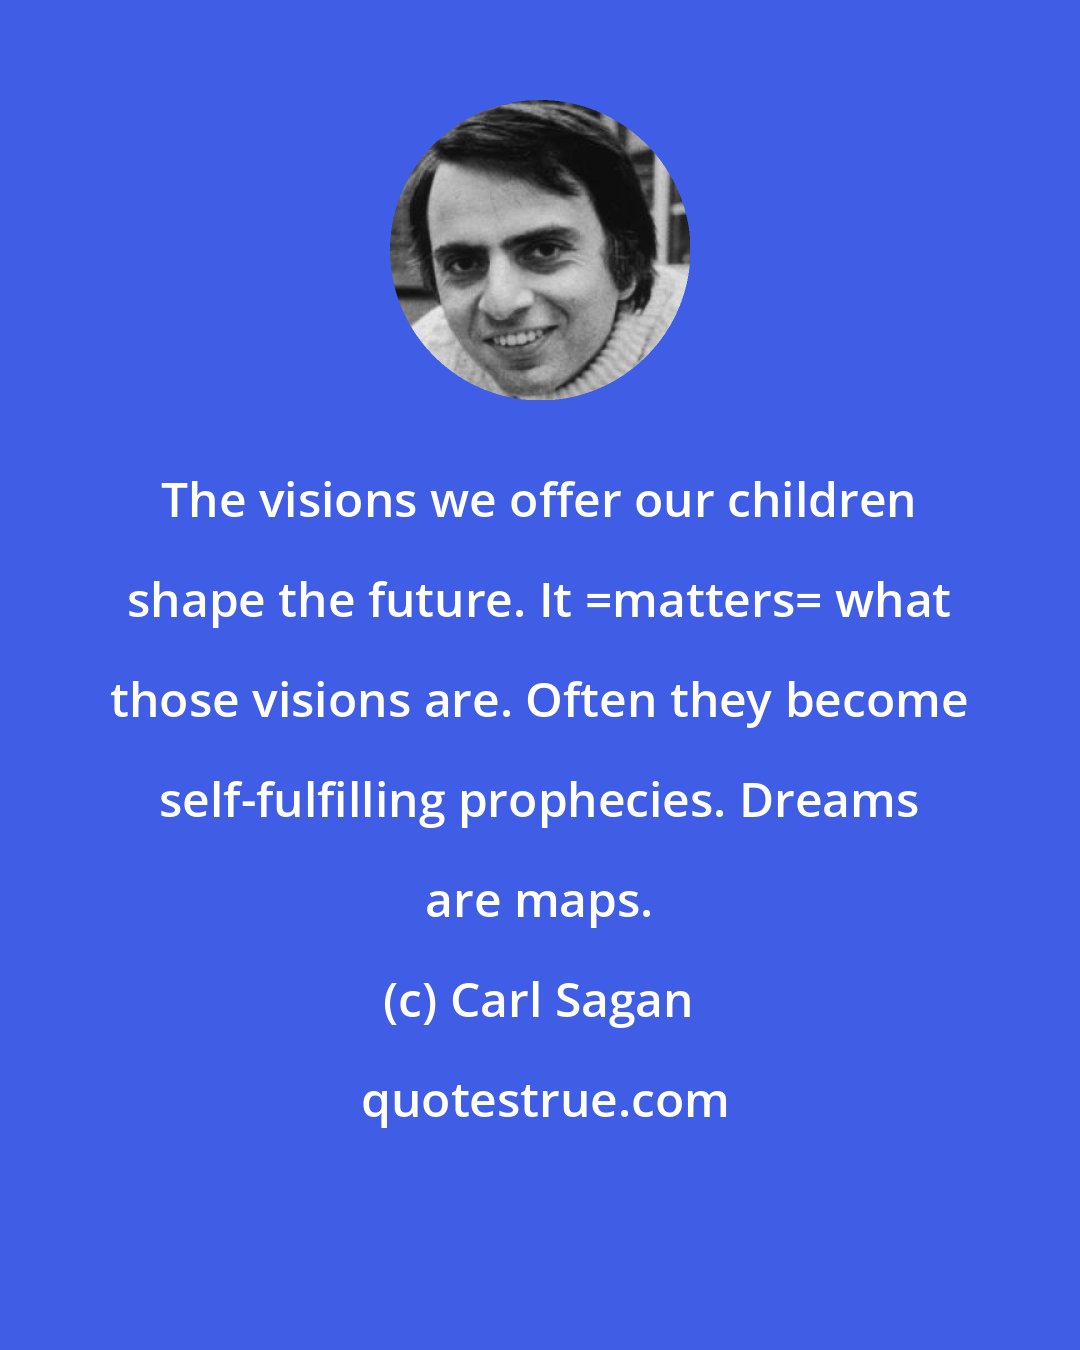 Carl Sagan: The visions we offer our children shape the future. It _matters_ what those visions are. Often they become self-fulfilling prophecies. Dreams are maps.